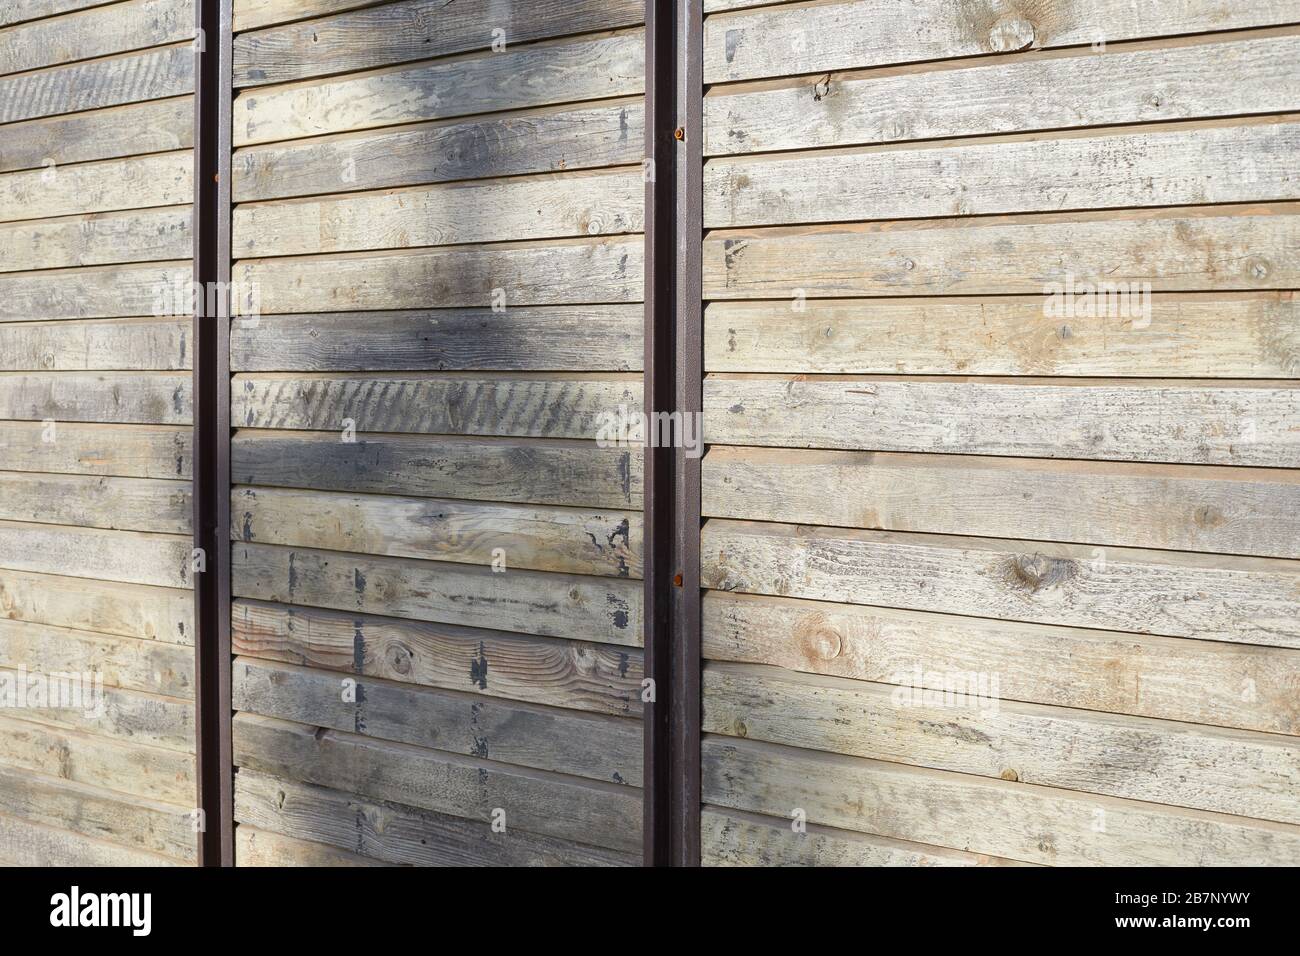 Wooden texture background with vertical metal bars in sunlight Stock Photo